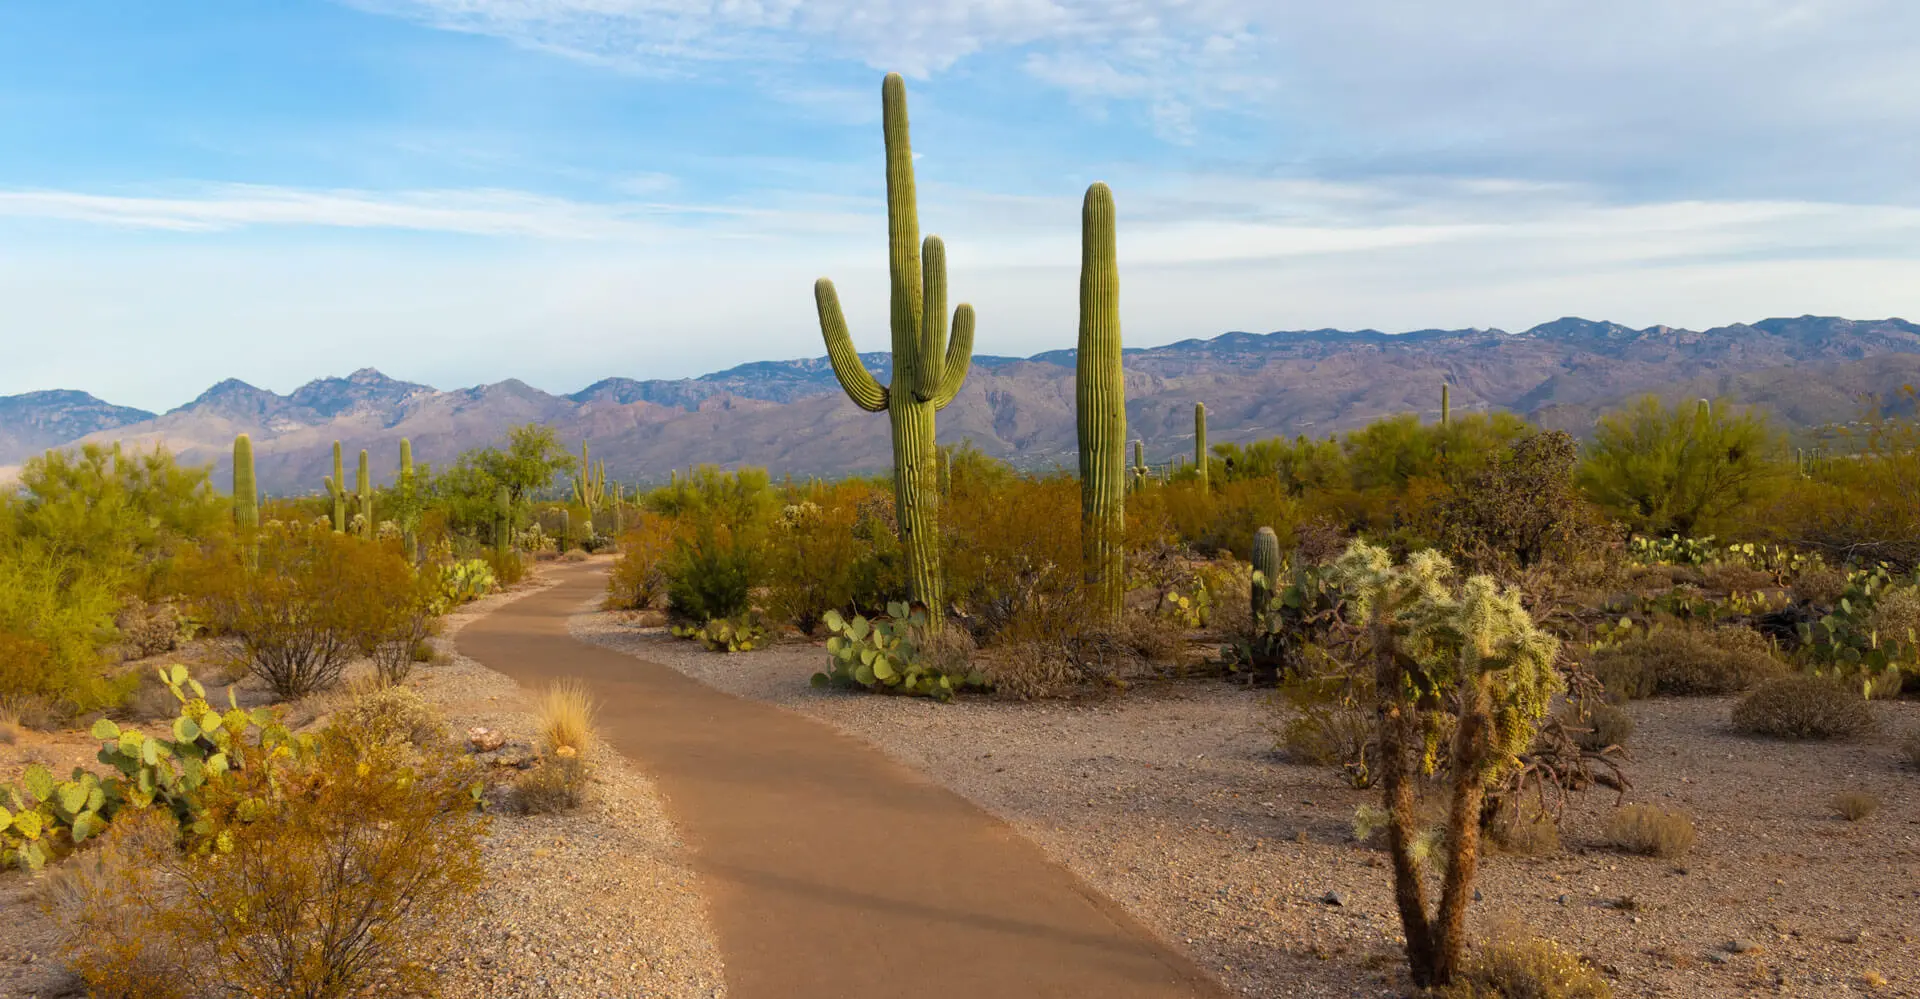 A dirt road with cactus and other plants on it.